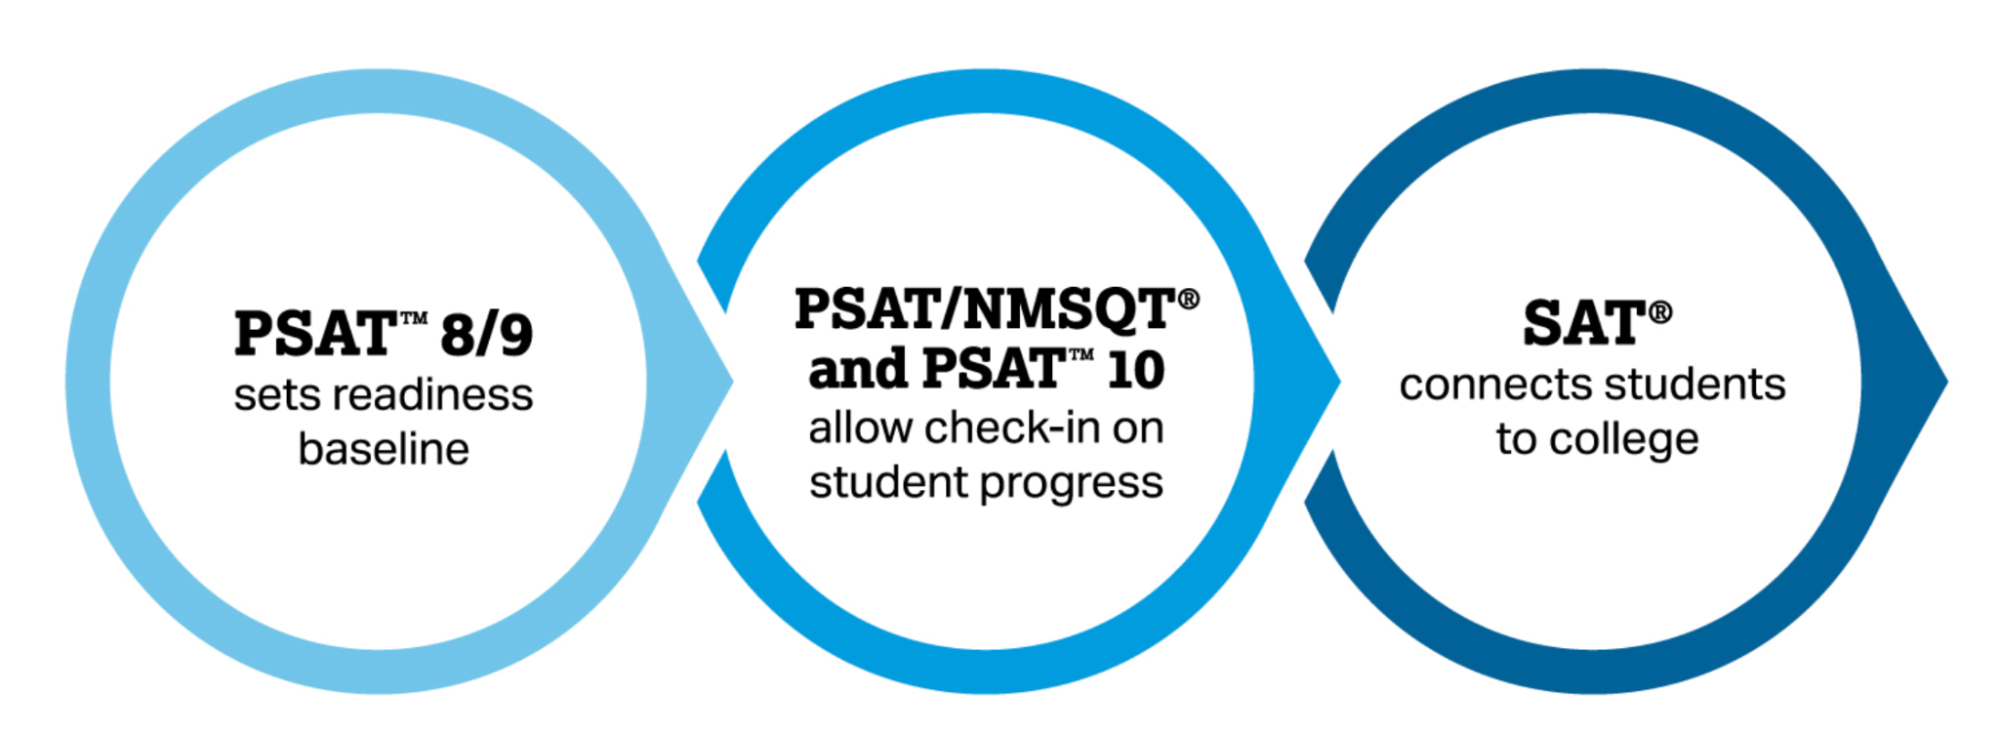 PSAT 8/9 sets readiness baseline. PSAT/NMSQT and PSAT 10 allow check-in on student progress. SAT connects students to college